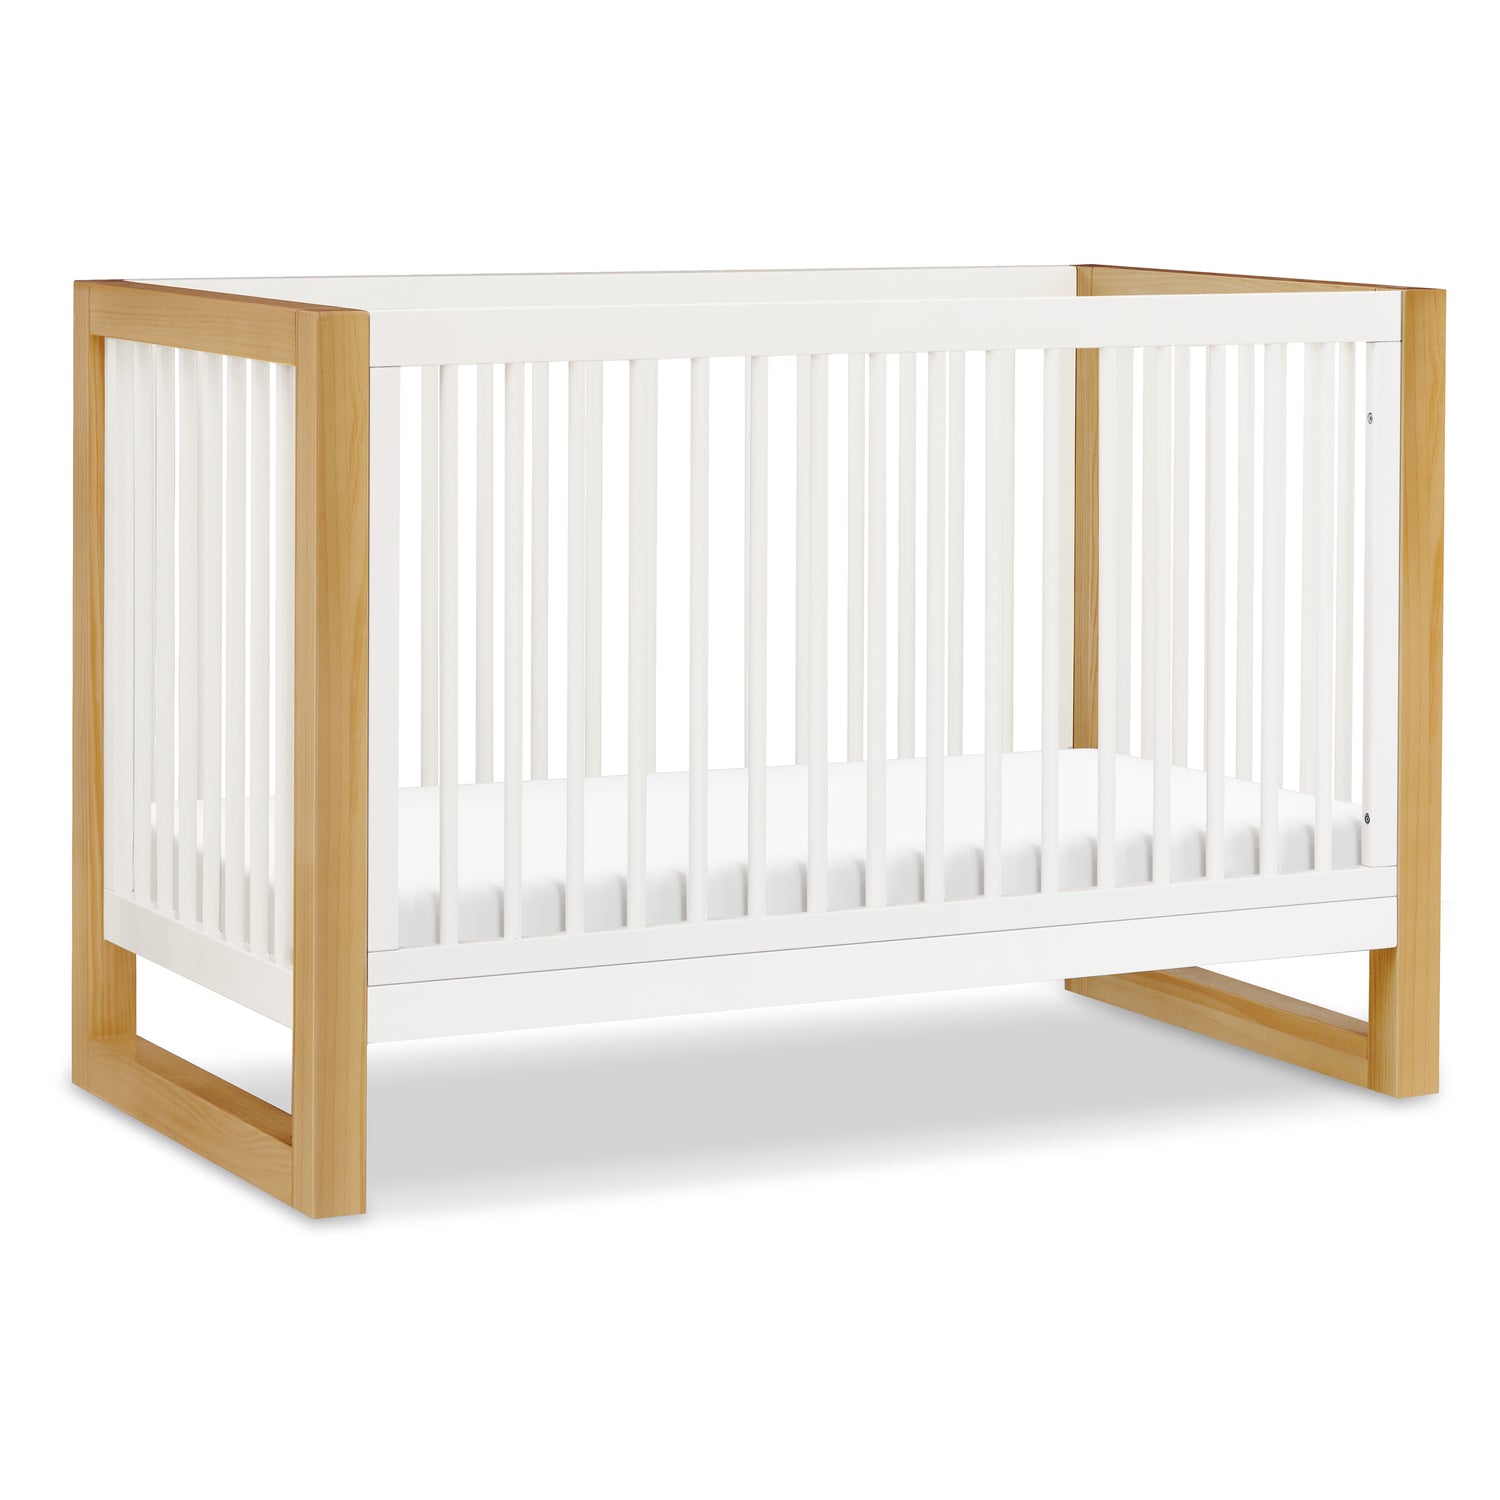 M23301RWHY,Nantucket 3-in-1 Convertible Crib w/ Toddler Bed Conversion Kit in Warm White/Honey